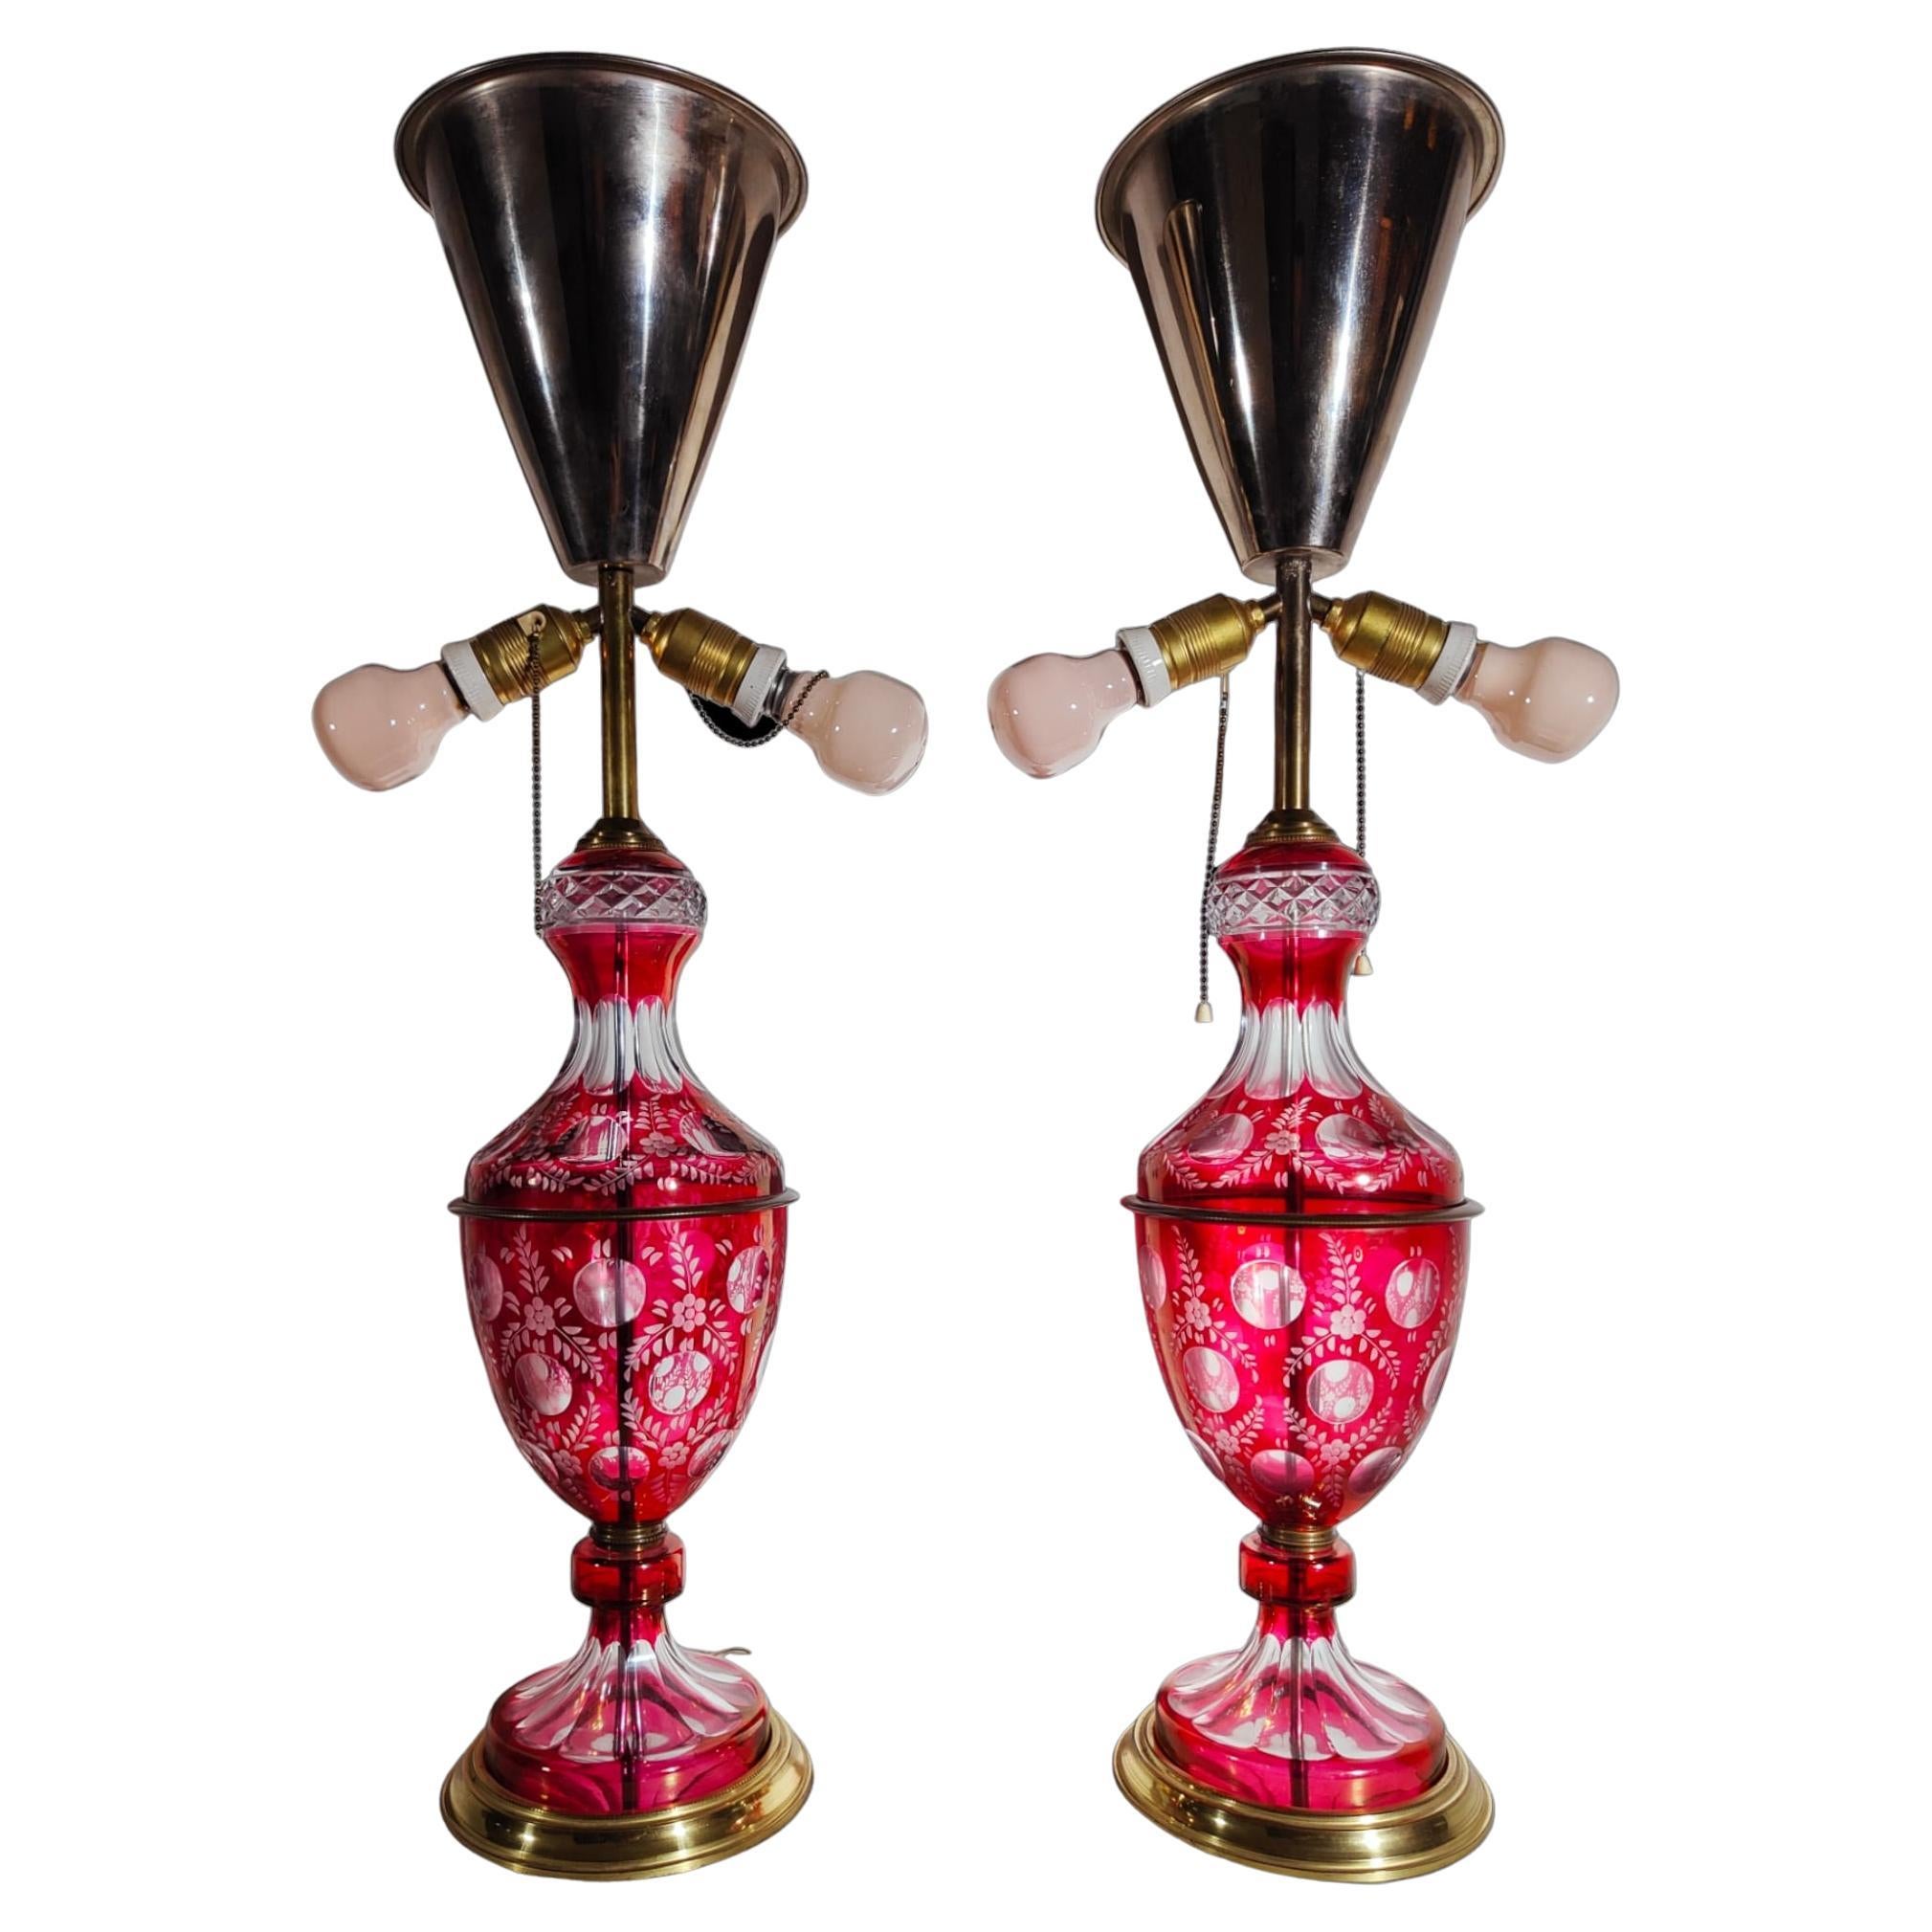 Lamps in Cut Glass from 1900, 20th Century